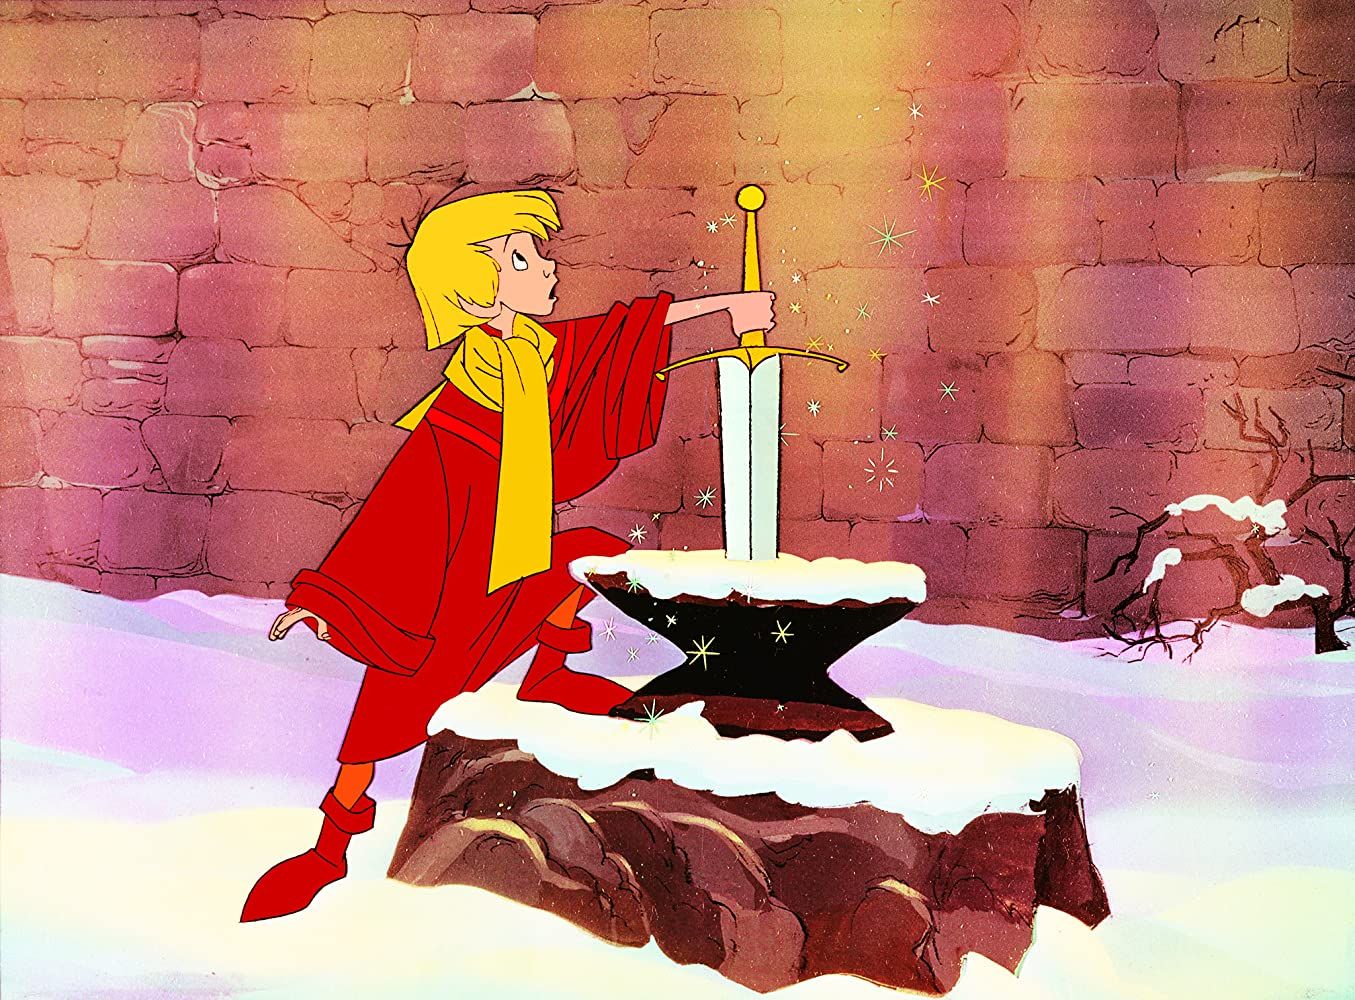 Disney’s The Sword in the Stone Remains One of the Best King Arthur Adapations